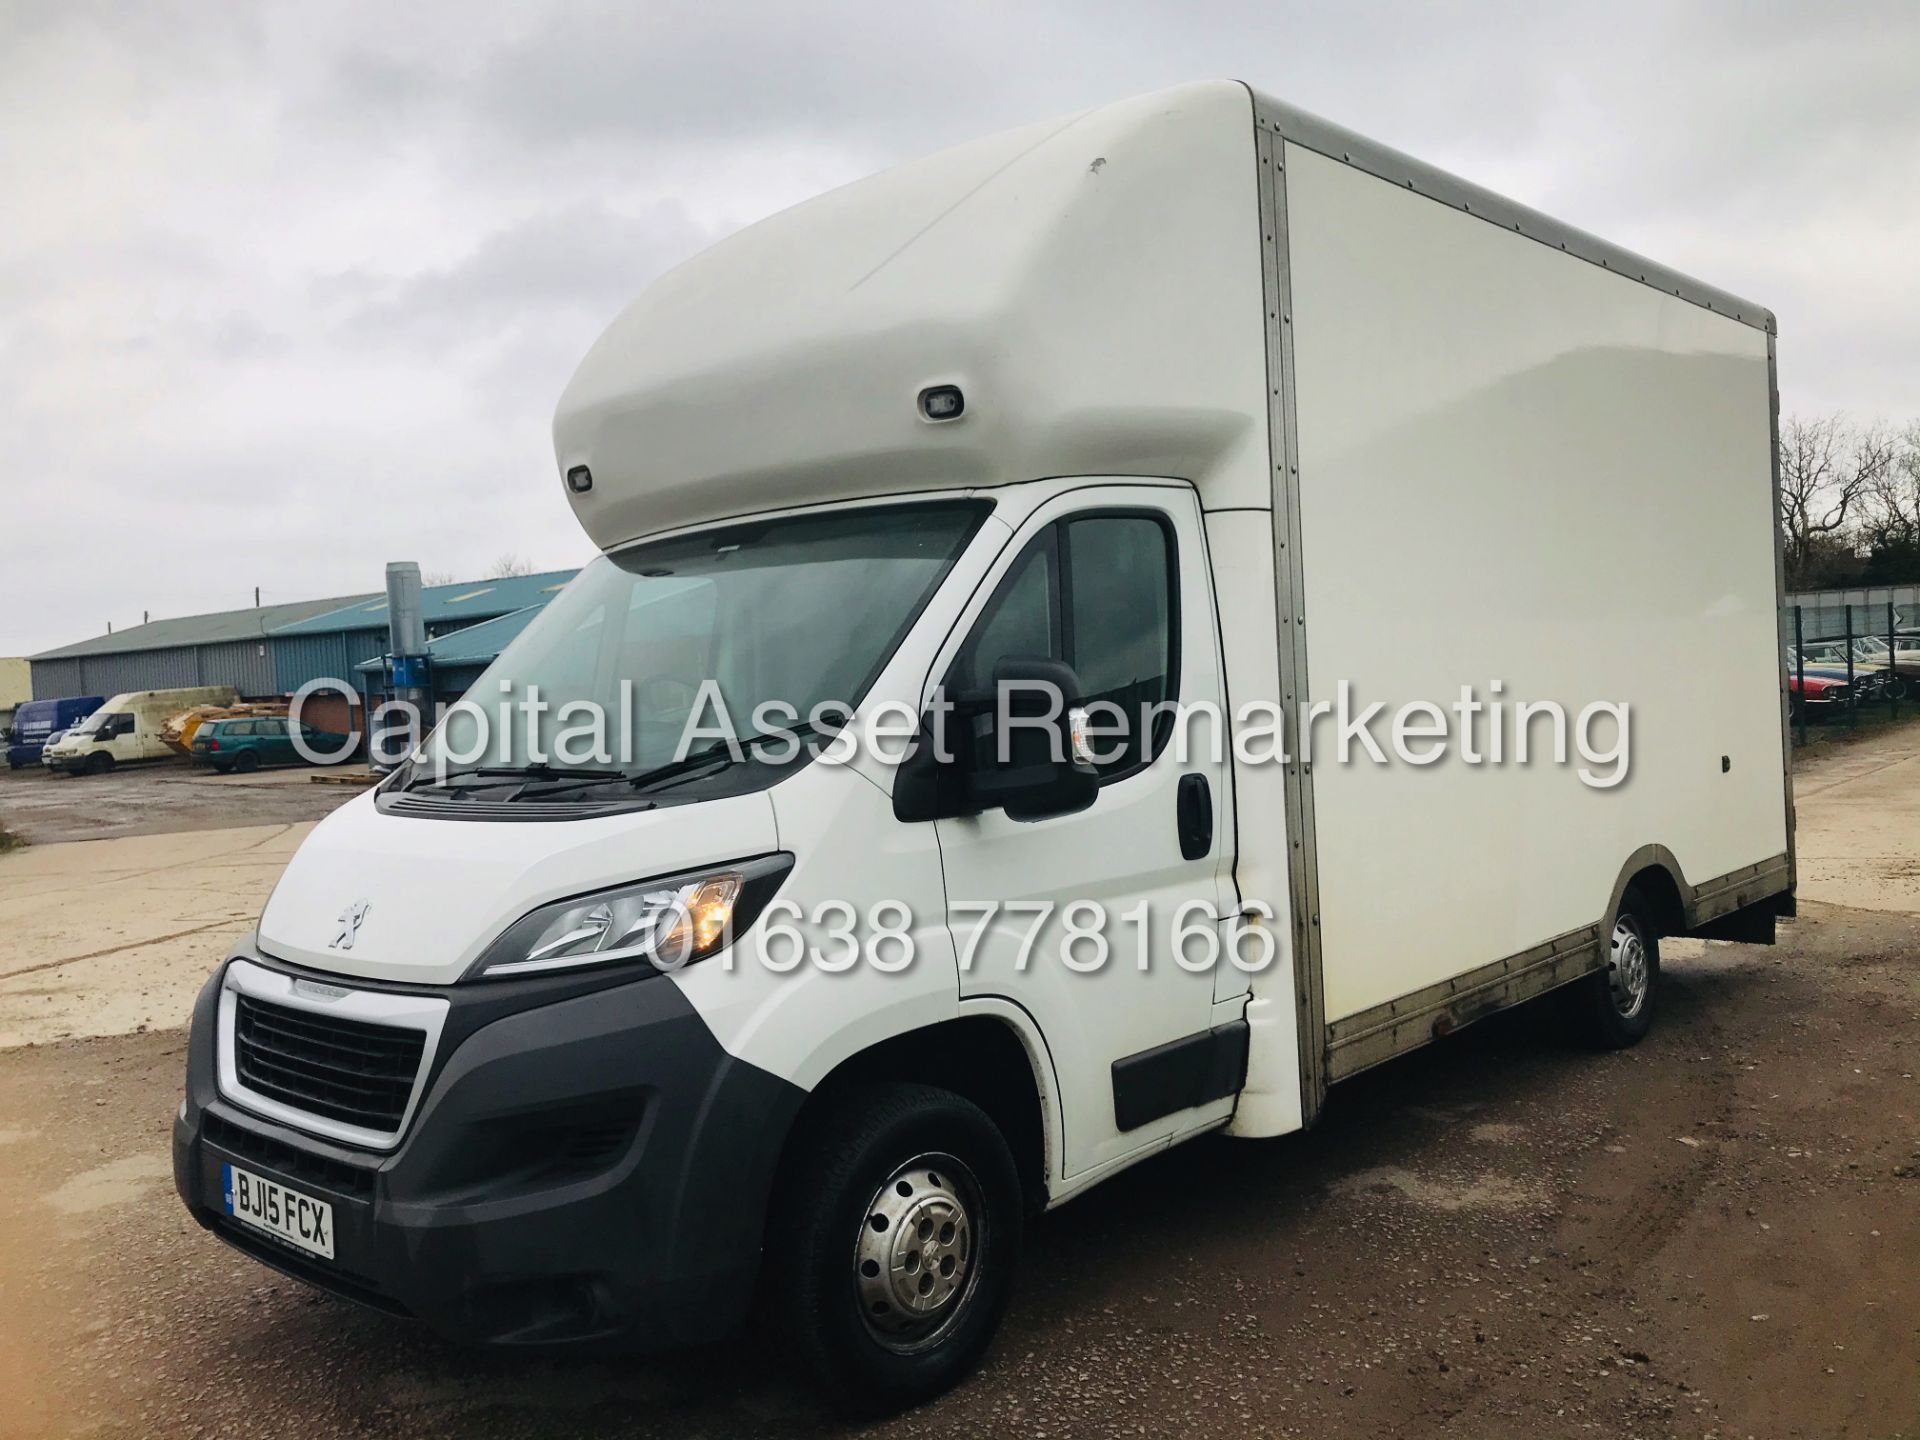 On Sale PEUGEOT BOXER 2.2HDI (130) LONG WHEEL BASE LUTON LOW LOADER" MAXI MOVER - 15 REG - AIR CON - Image 6 of 20